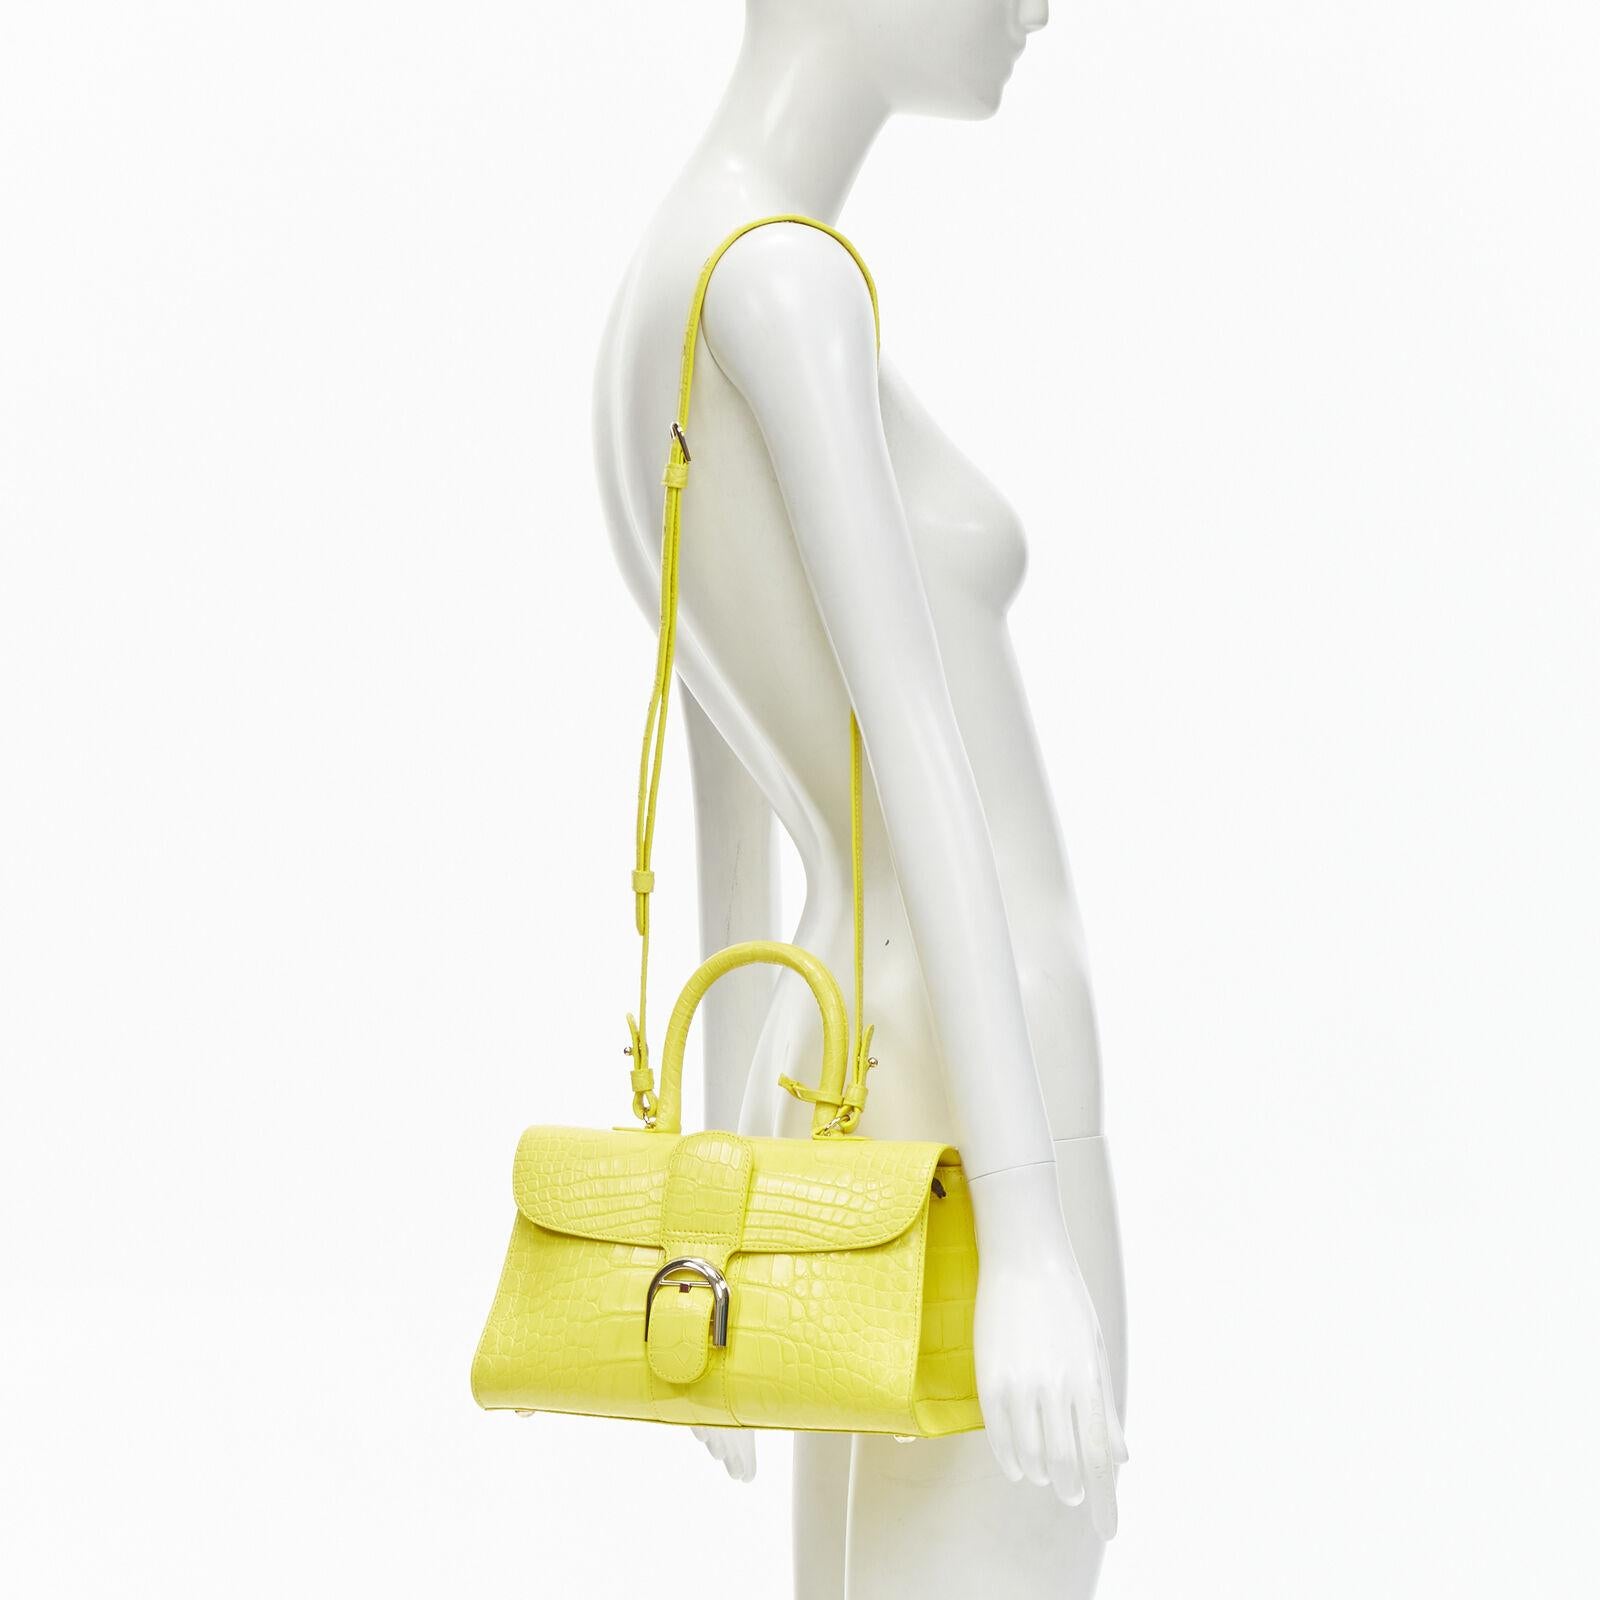 rare DELVAUX Brilliant E/W PM Sunshine Citron yellow croc crossbody satchel bag
Reference: KNLM/A00237
Brand: Delvaux
Model: Brilliant E/W PM
Material: Leather, Blend
Color: Yellow, Silver
Pattern: Solid
Closure: Buckle
Lining: Leather
Extra